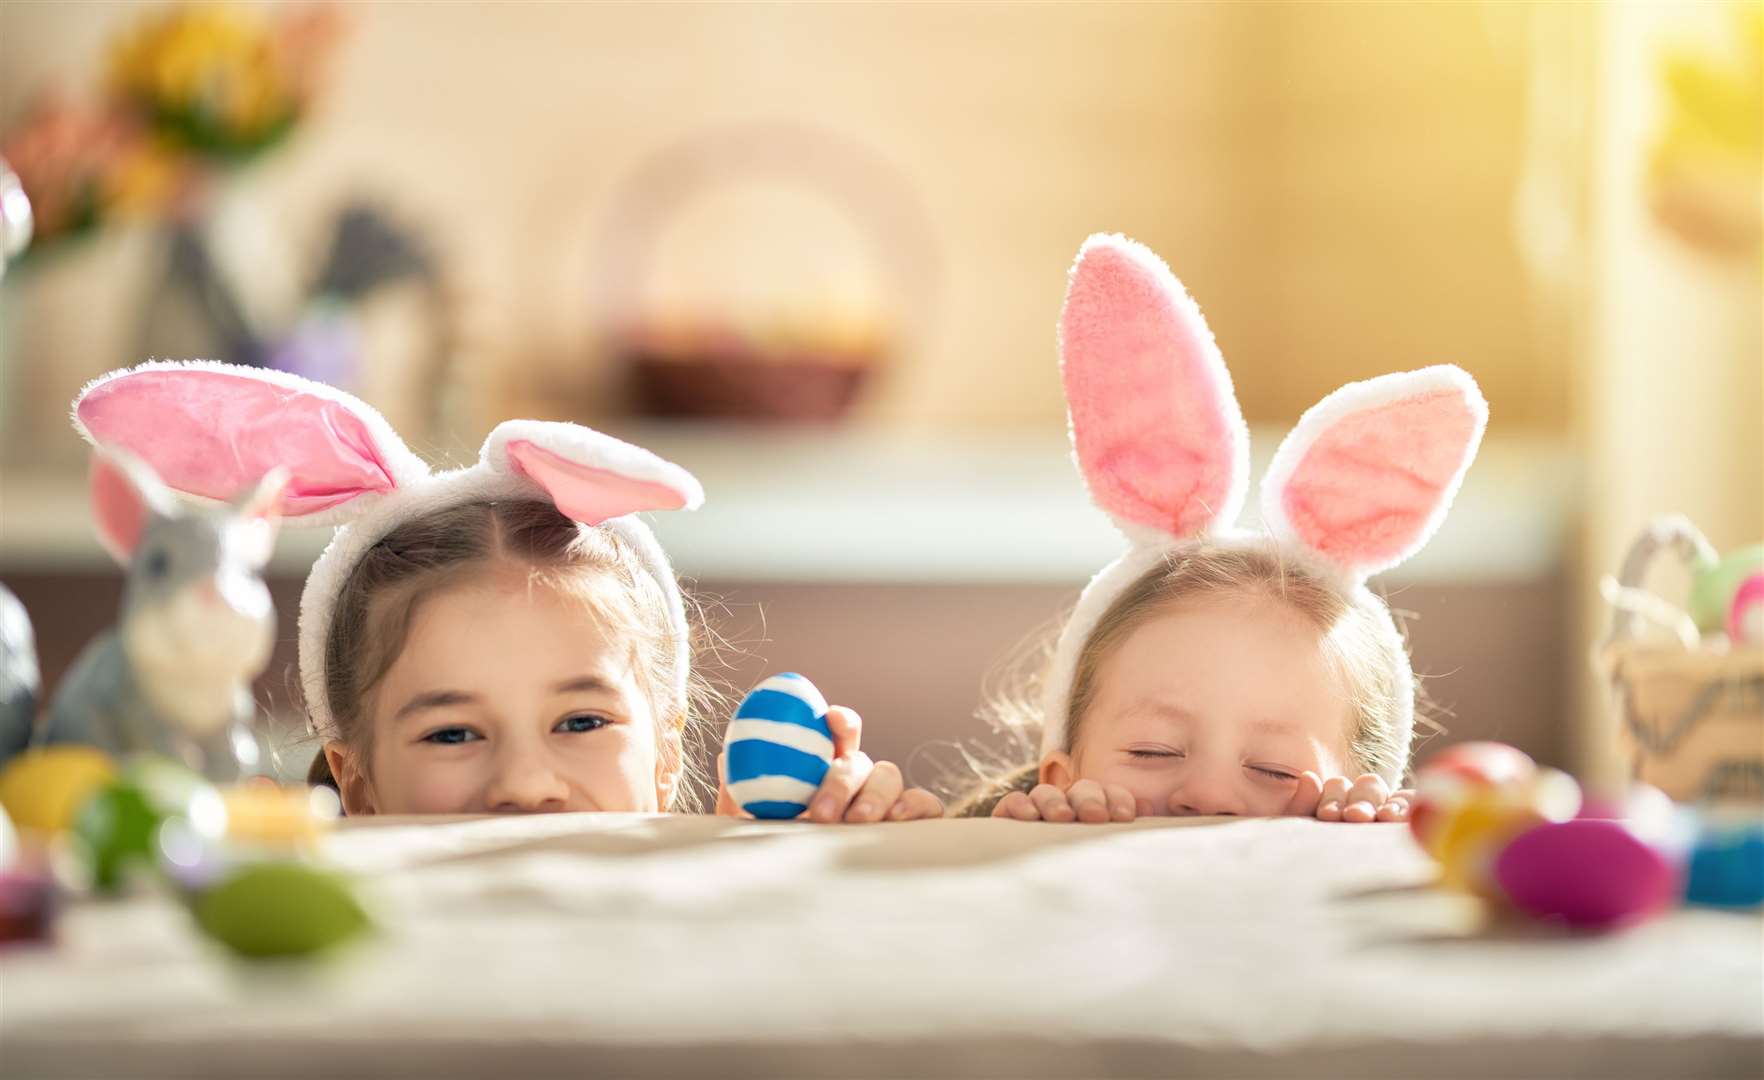 Ask the grownups of the family to hide eggs around their own houses, and have the kids try spot them via a video tour of the house.